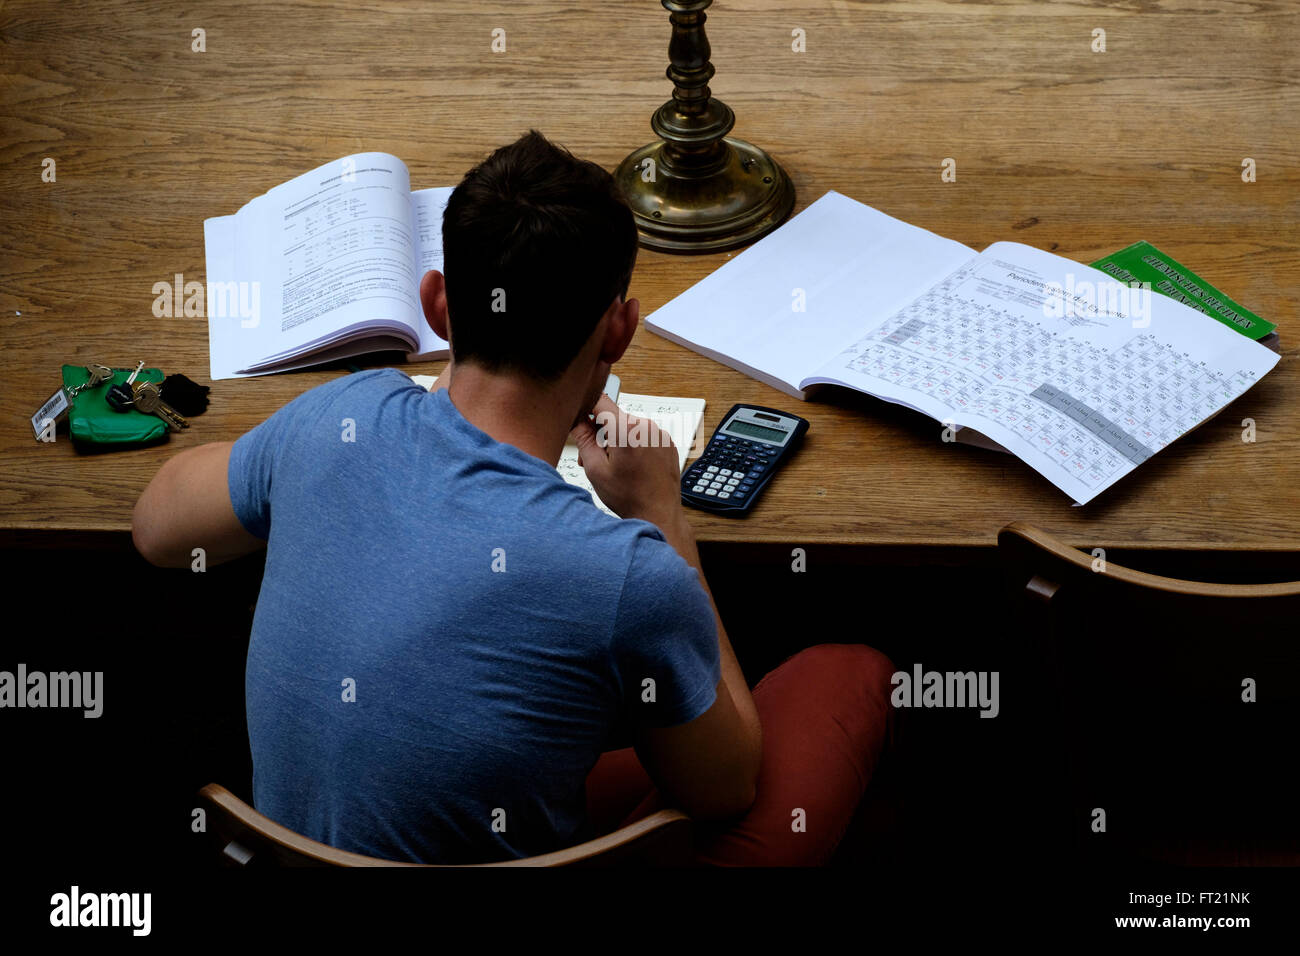 Overhead view of a student studying Stock Photo